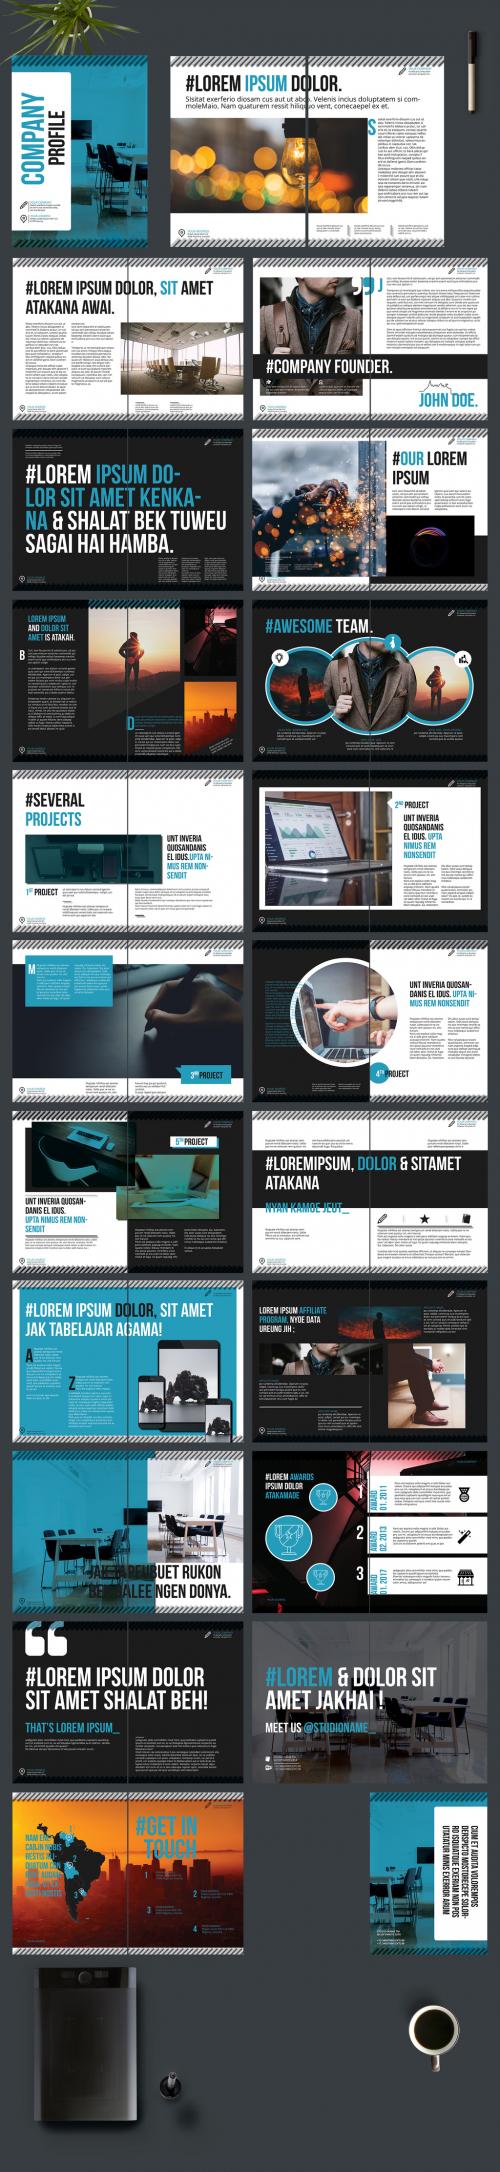 Adobe Stock - Teal and Black Brochure Layout - 215700913